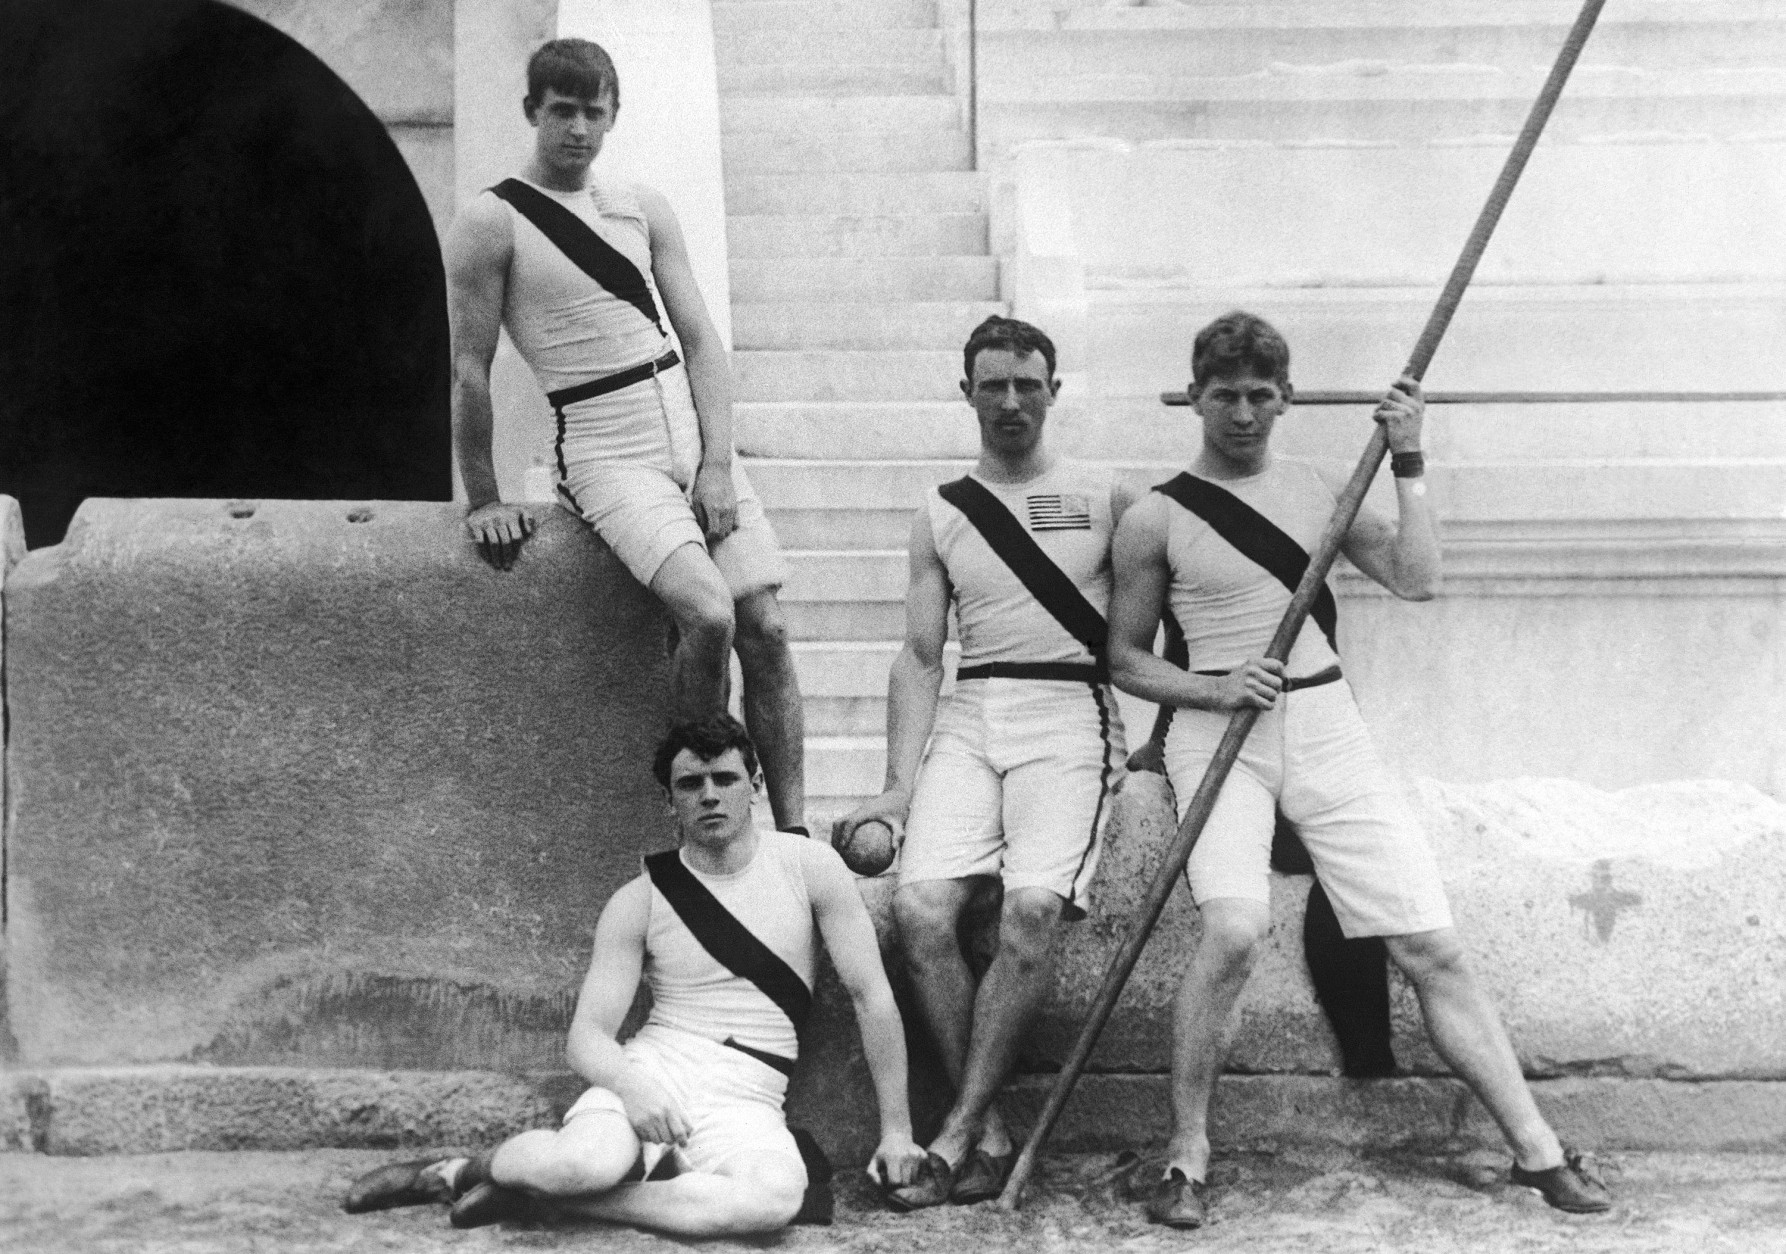 Members of the athletics team of the US Princeton University pose at the first modern International Summer Olympic Games held at the Panathinaiko Stadium in April 1896 in Athens, Greece. From left to right: Francis A. Lane, Herbert Jamison, Robert Garrett and Albert Tyler. (AP Photo)